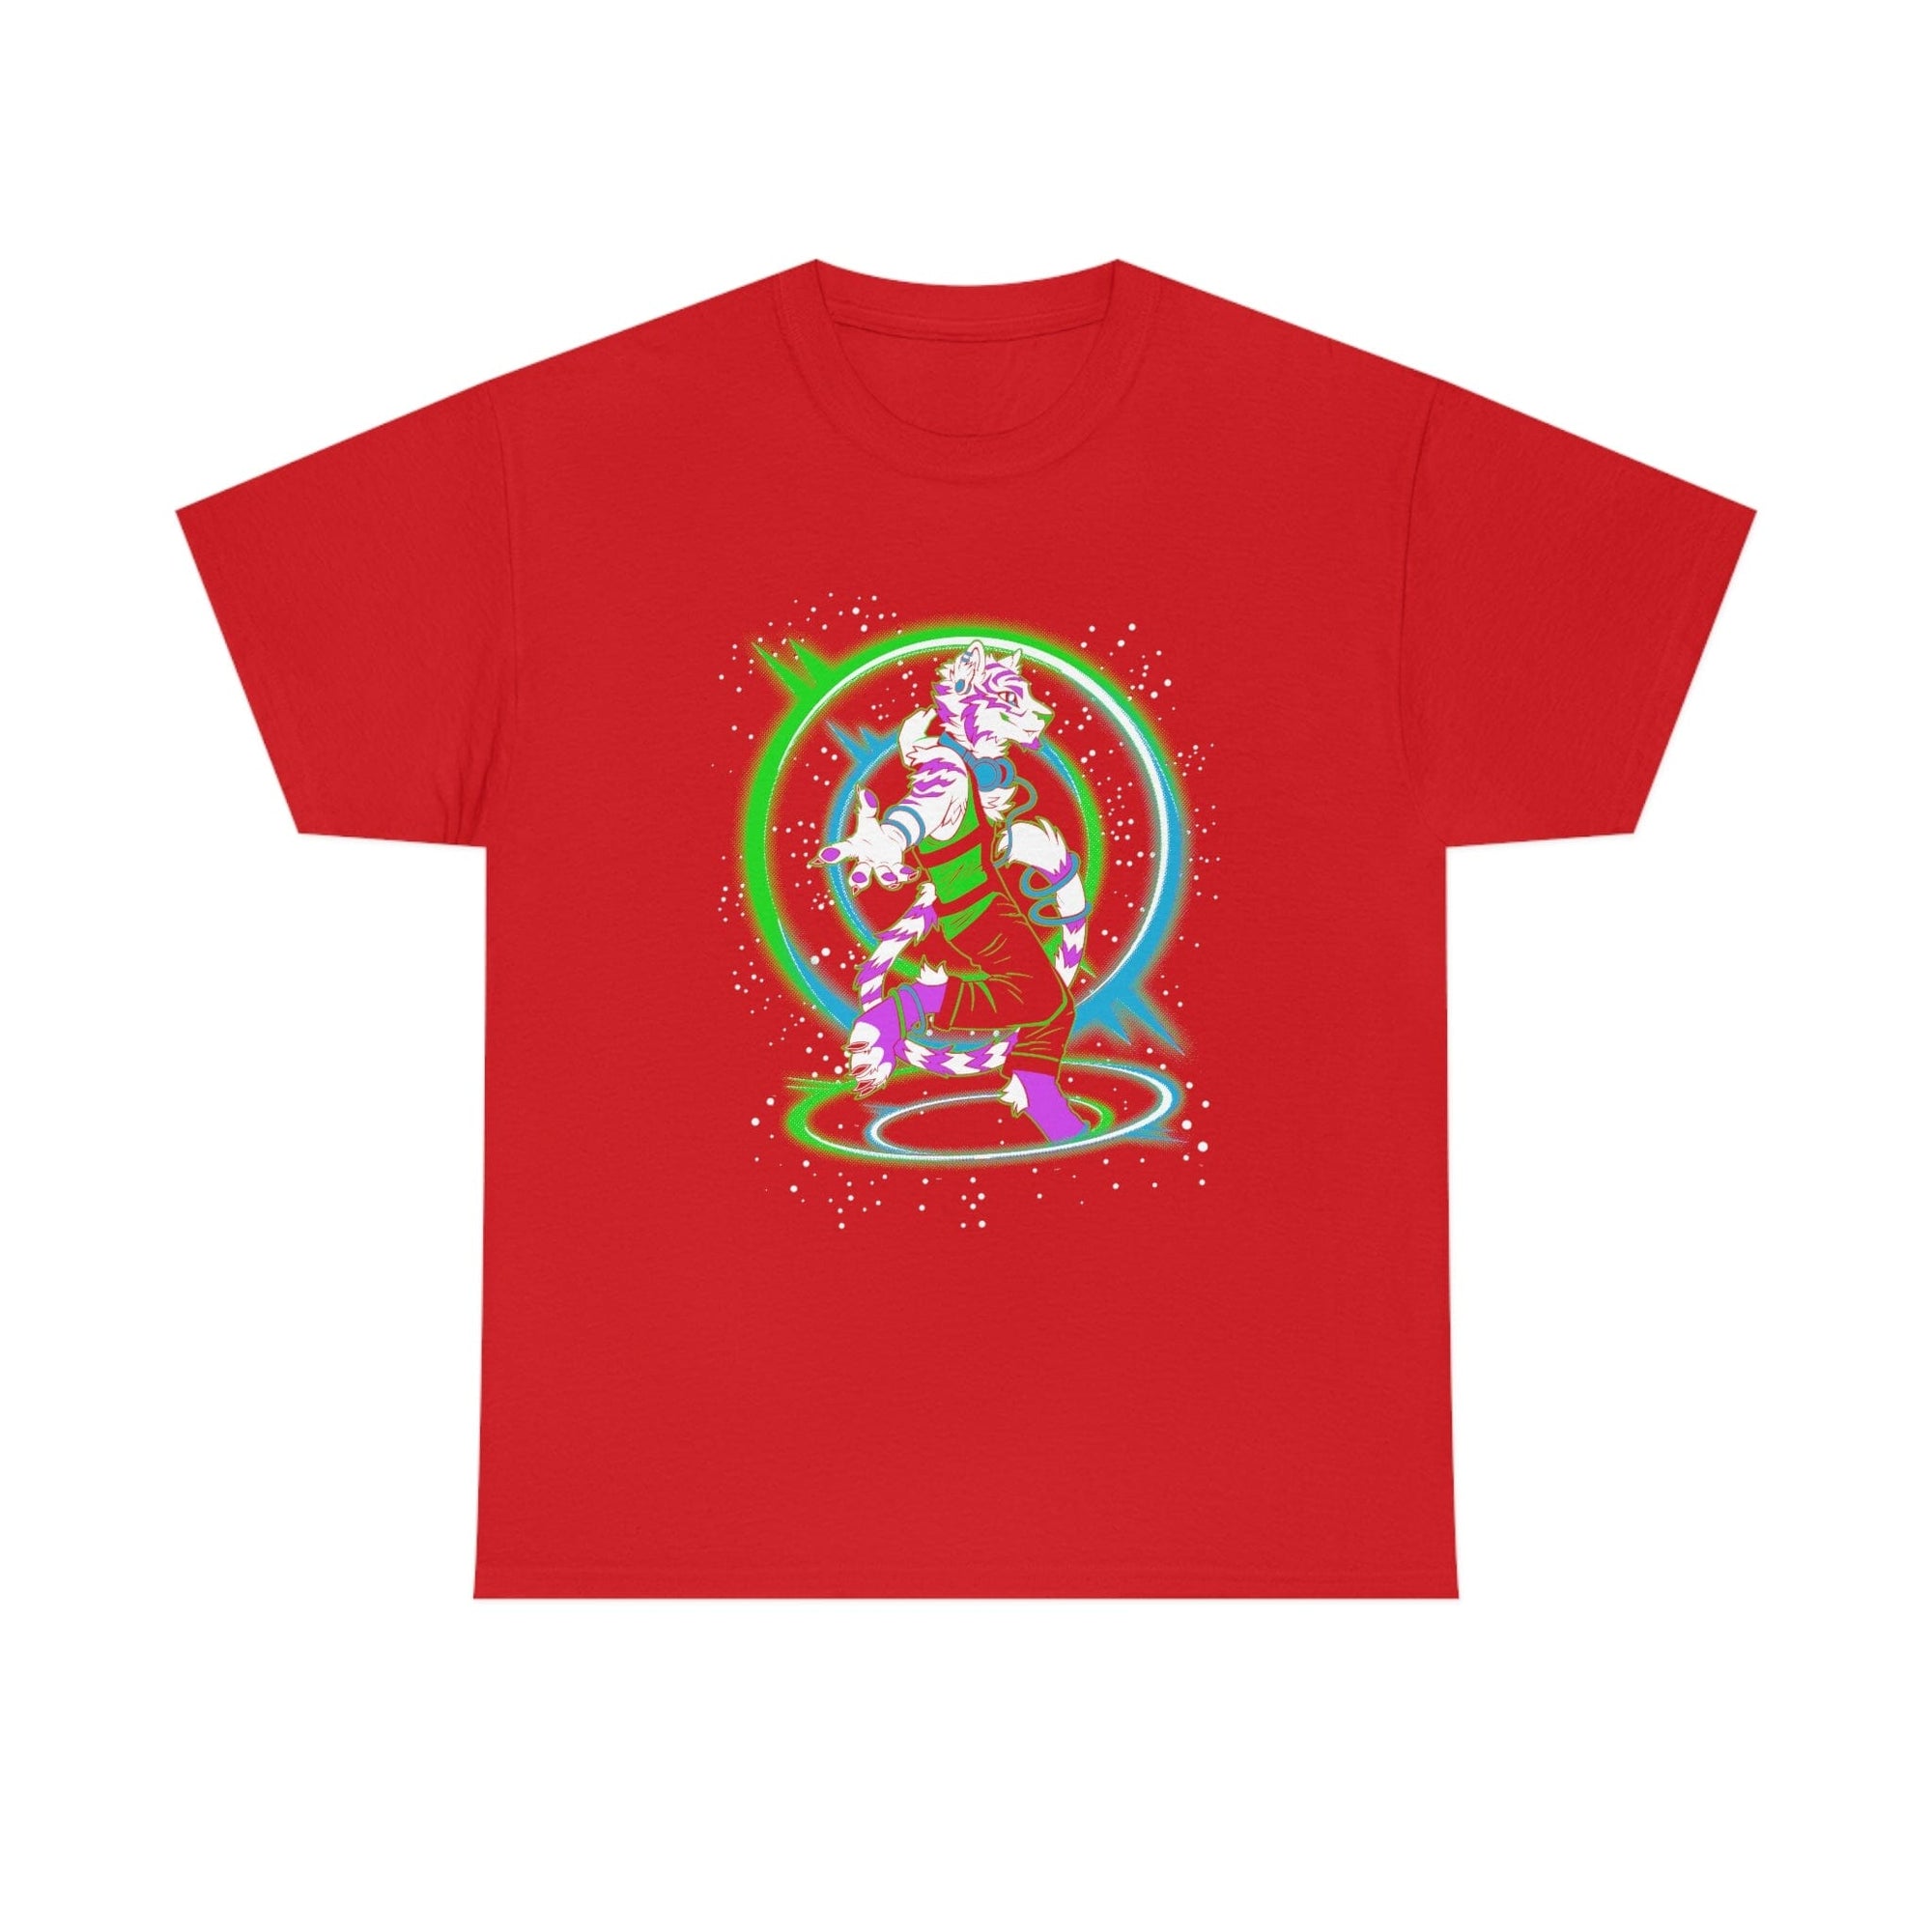 Rave Tiger - T-Shirt T-Shirt Artworktee Red S 